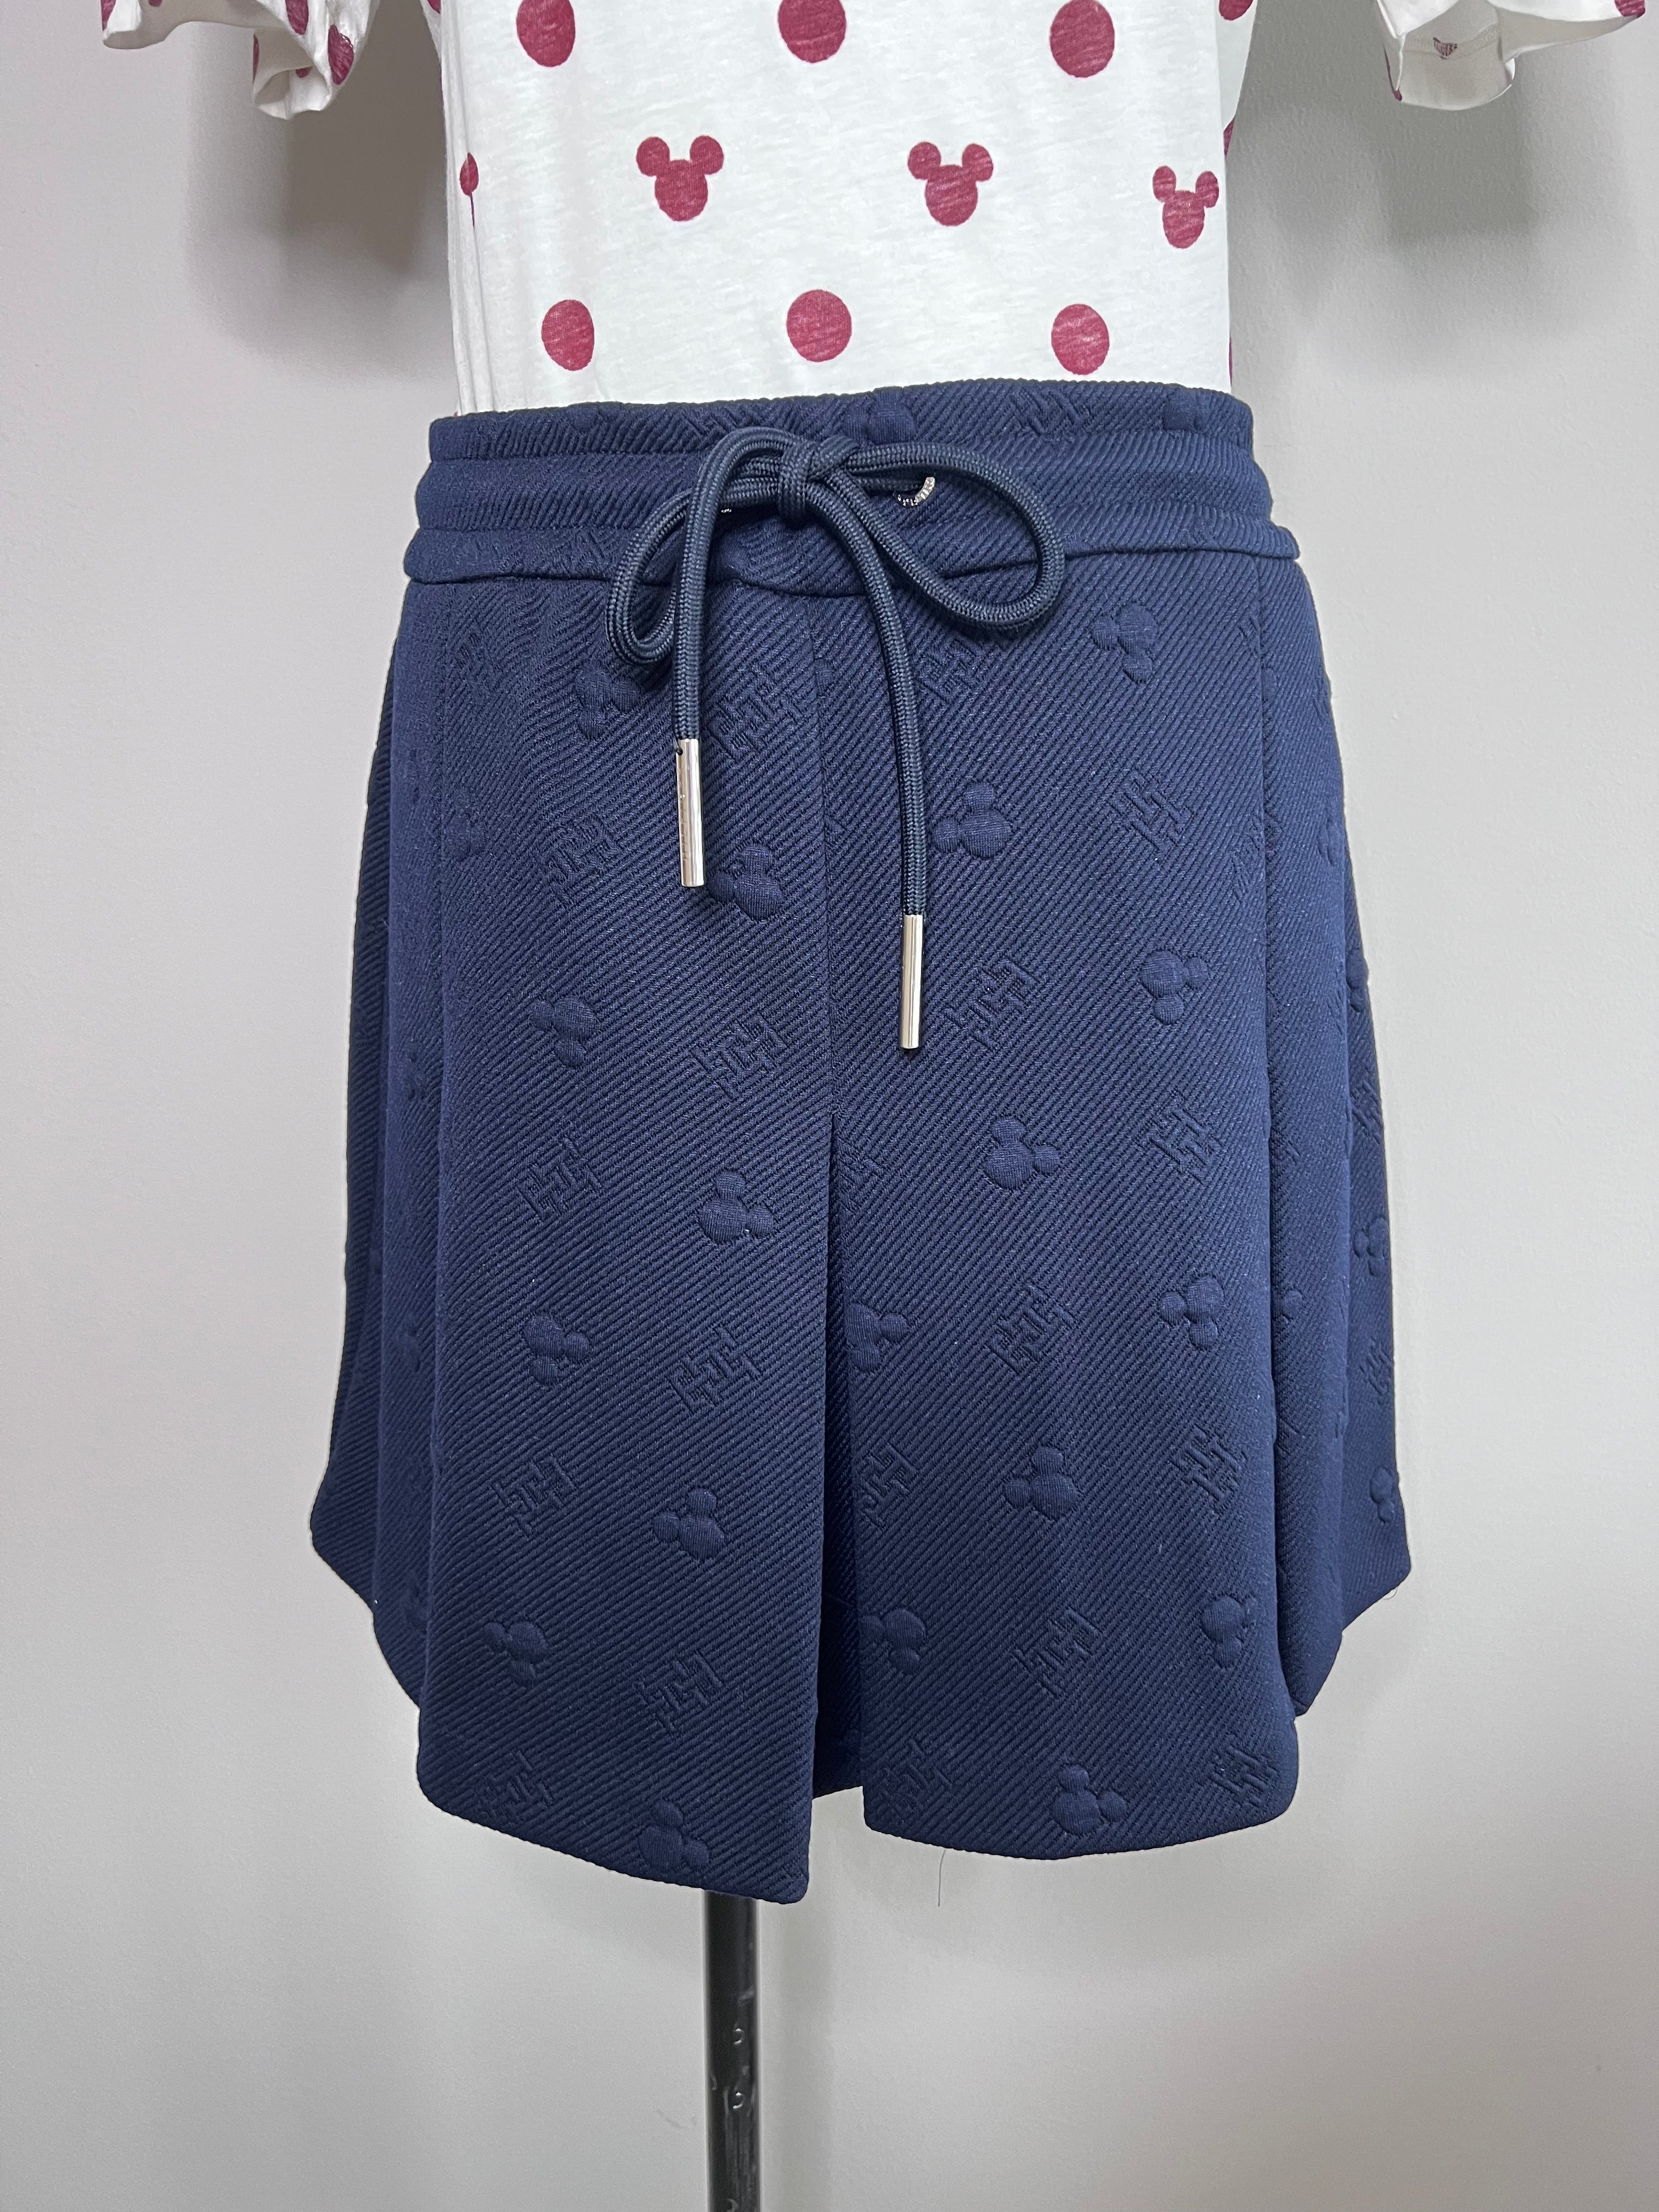 Mickey Mouse icon print pledged style skirt in navy blue - TOMMY HILFIGER